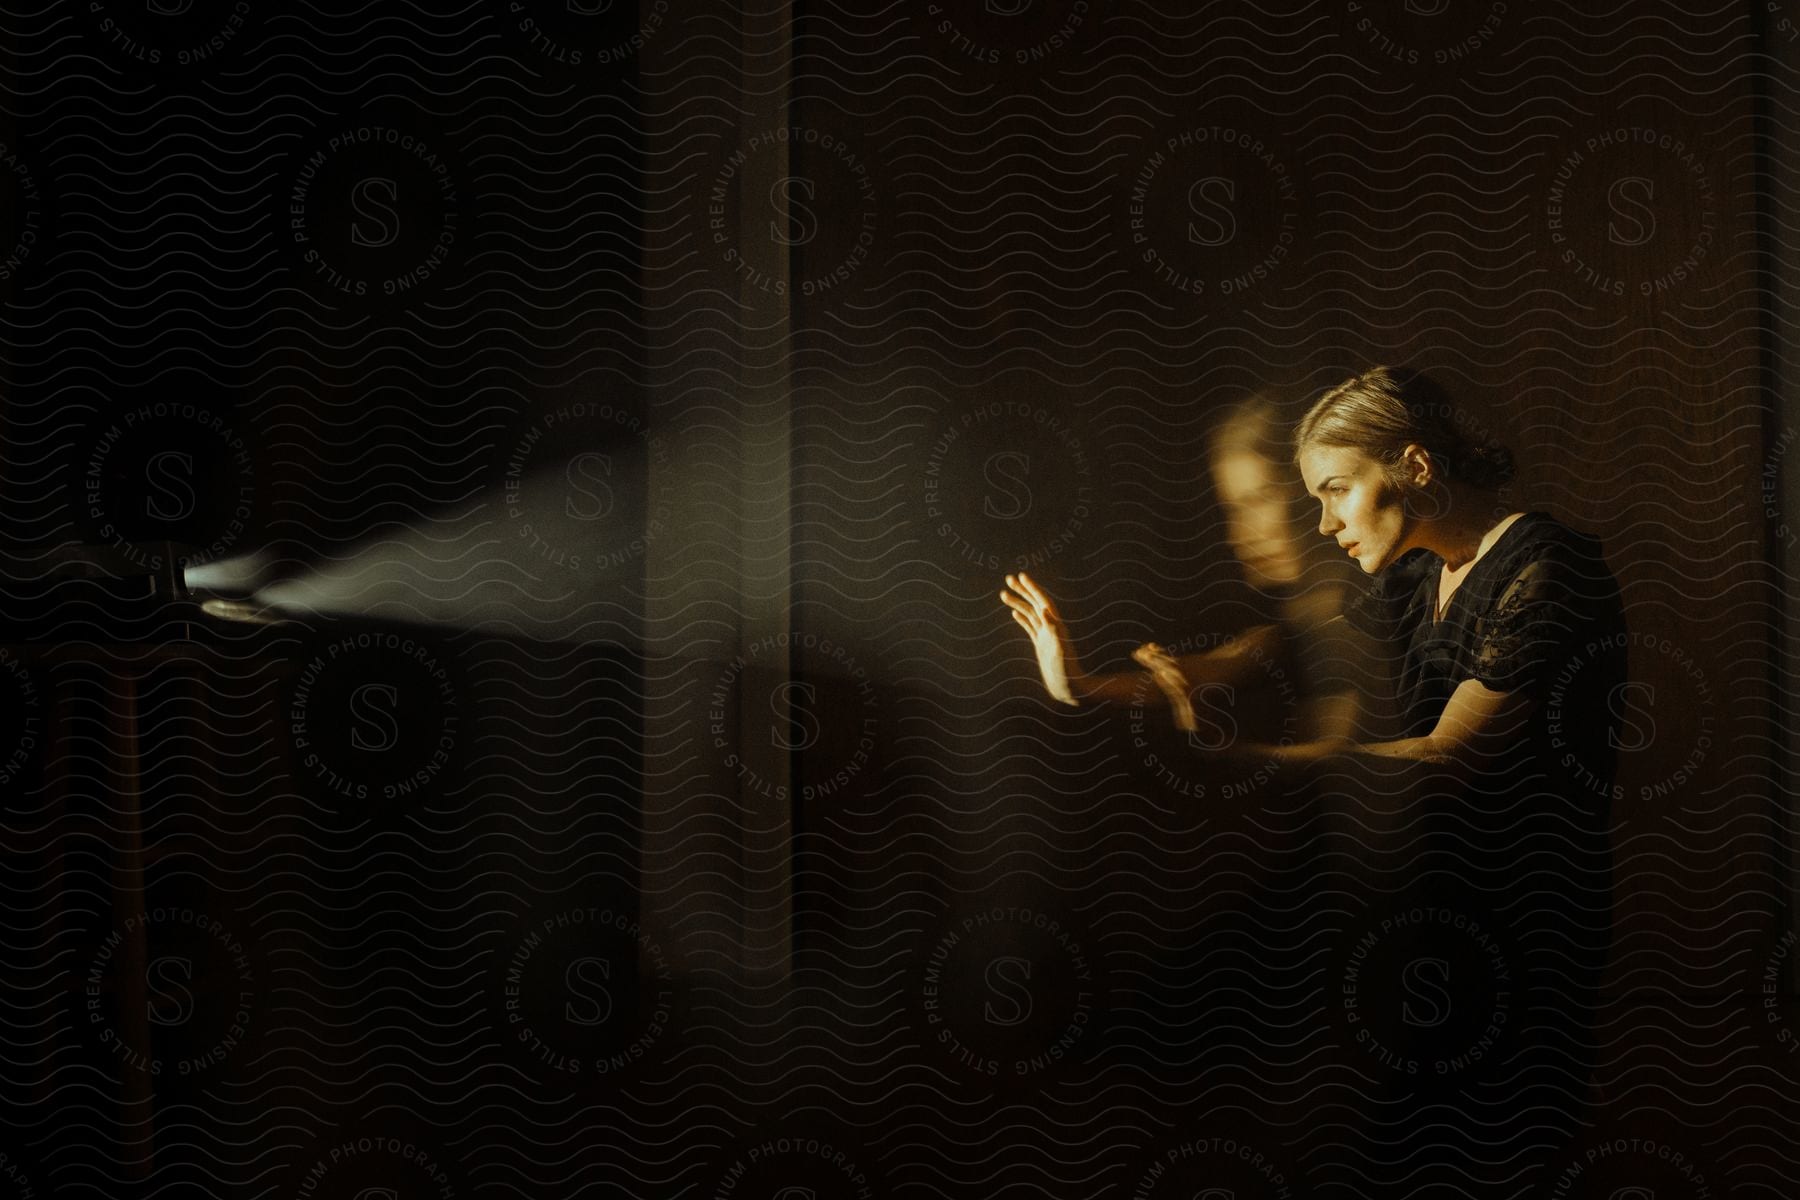 A woman dressed in black gesticulating towards a light source in a double exposure